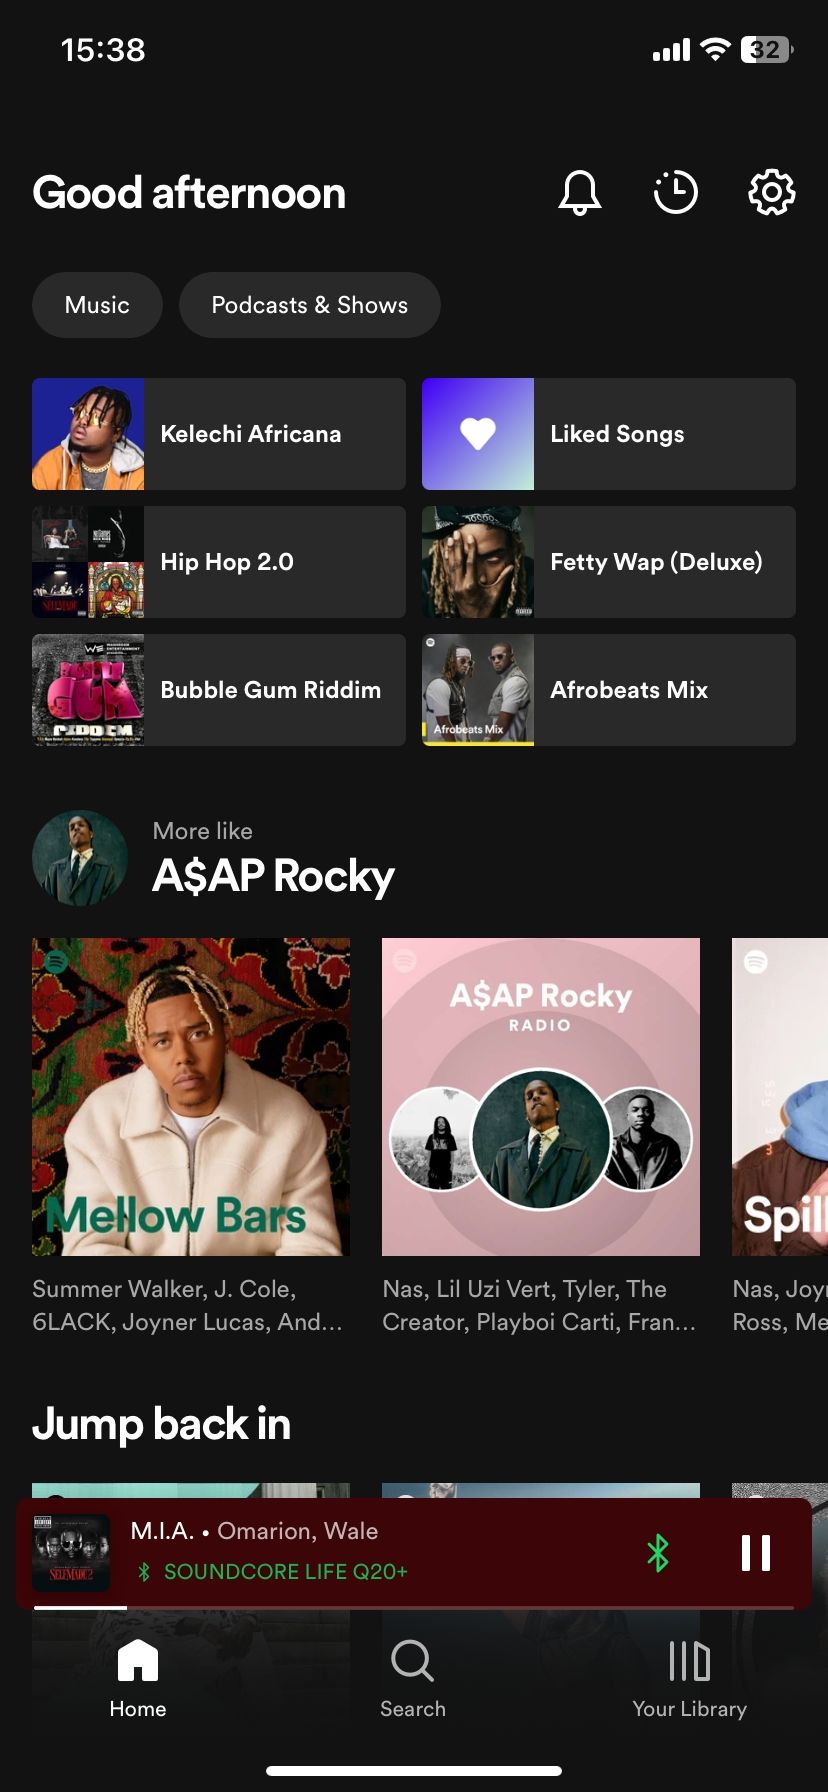 Spotify's Home tab on mobile